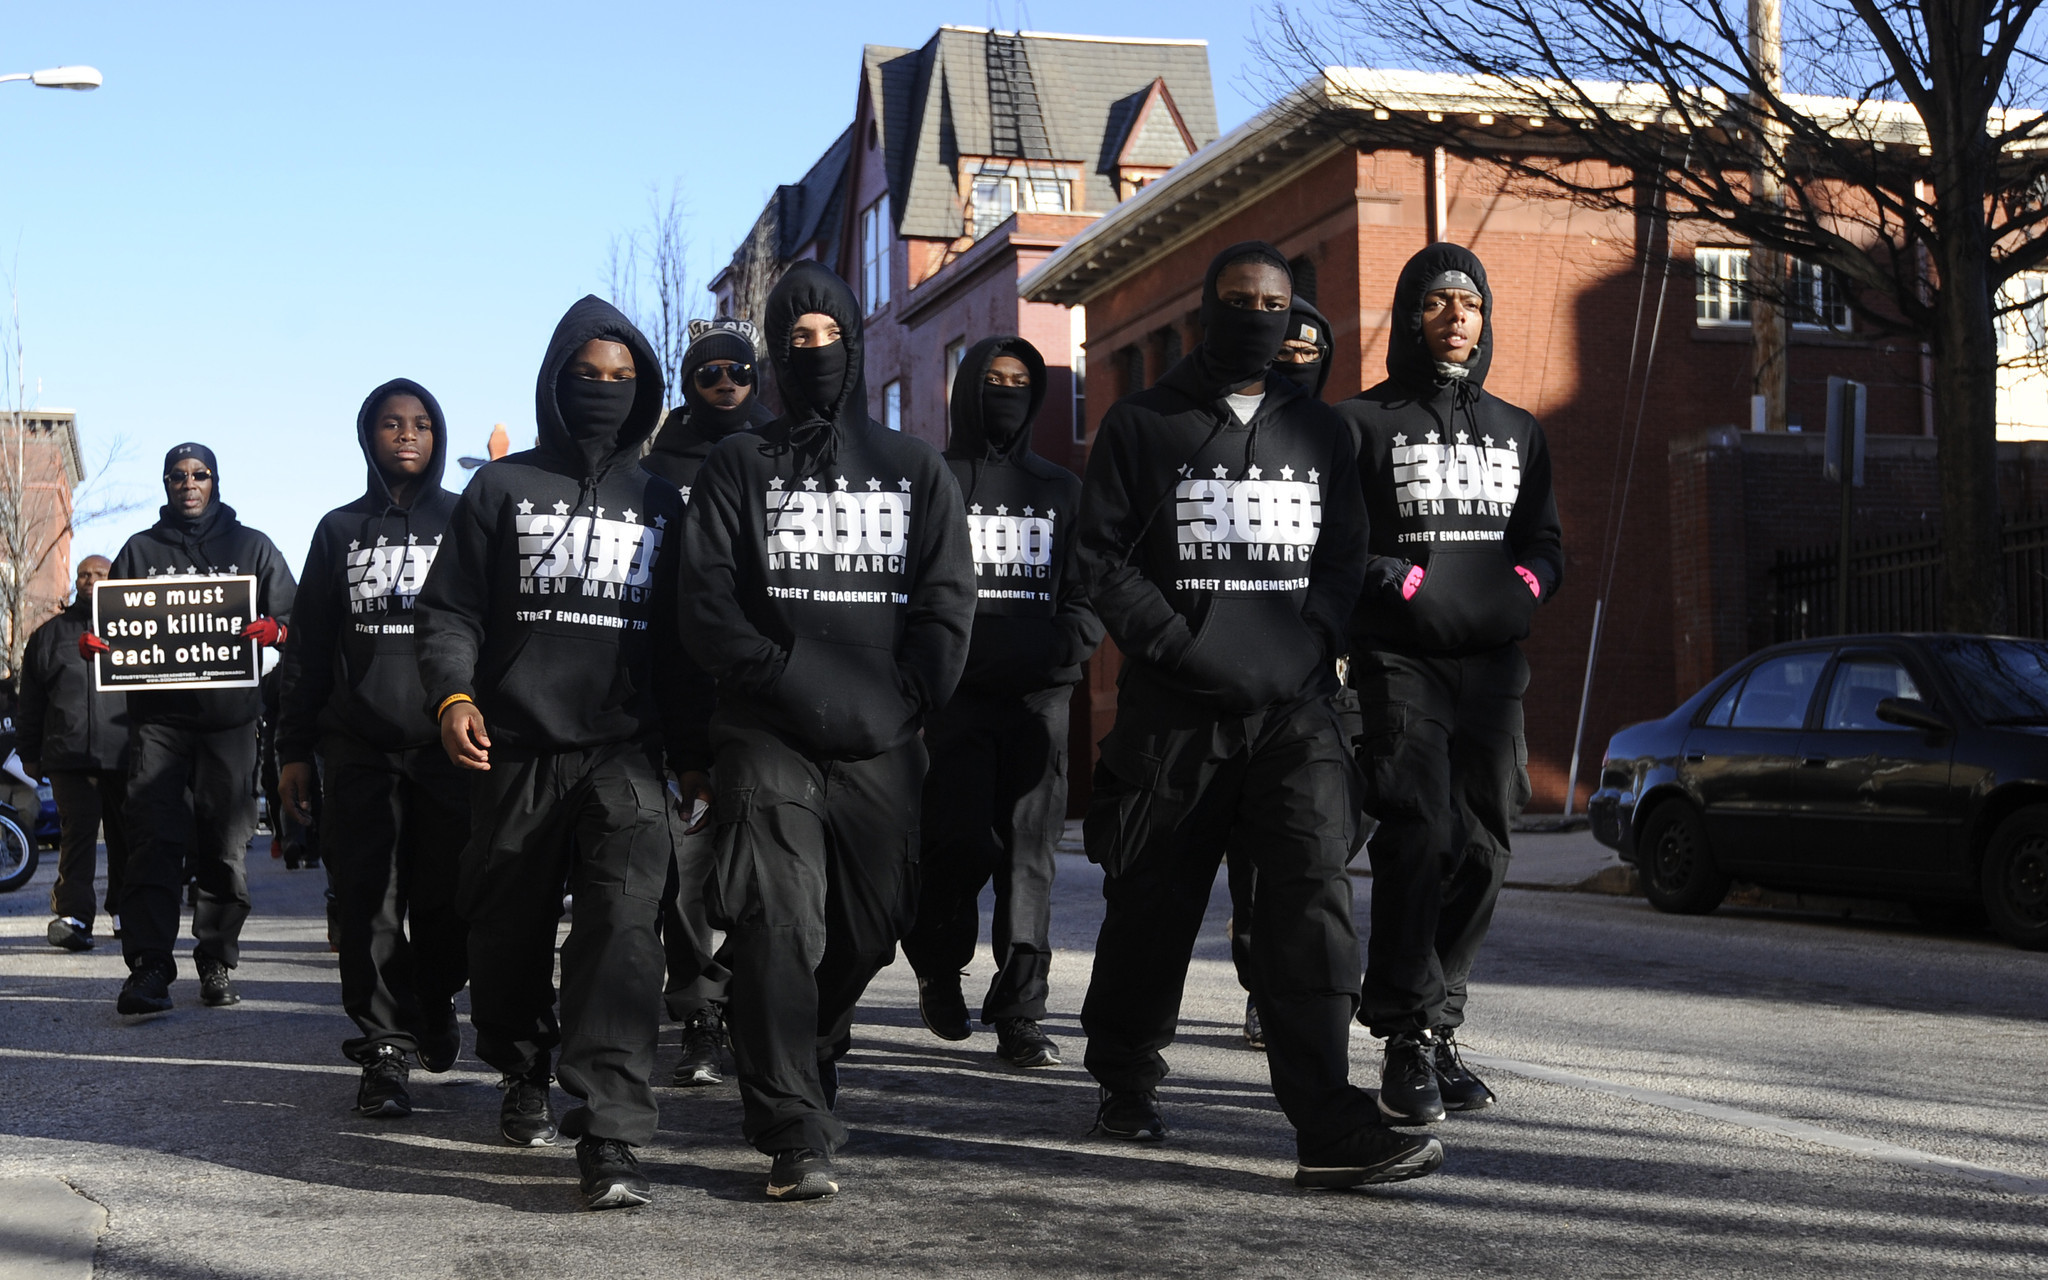 300 Men March rally with city on brink of 300 homicides - Baltimore Sun